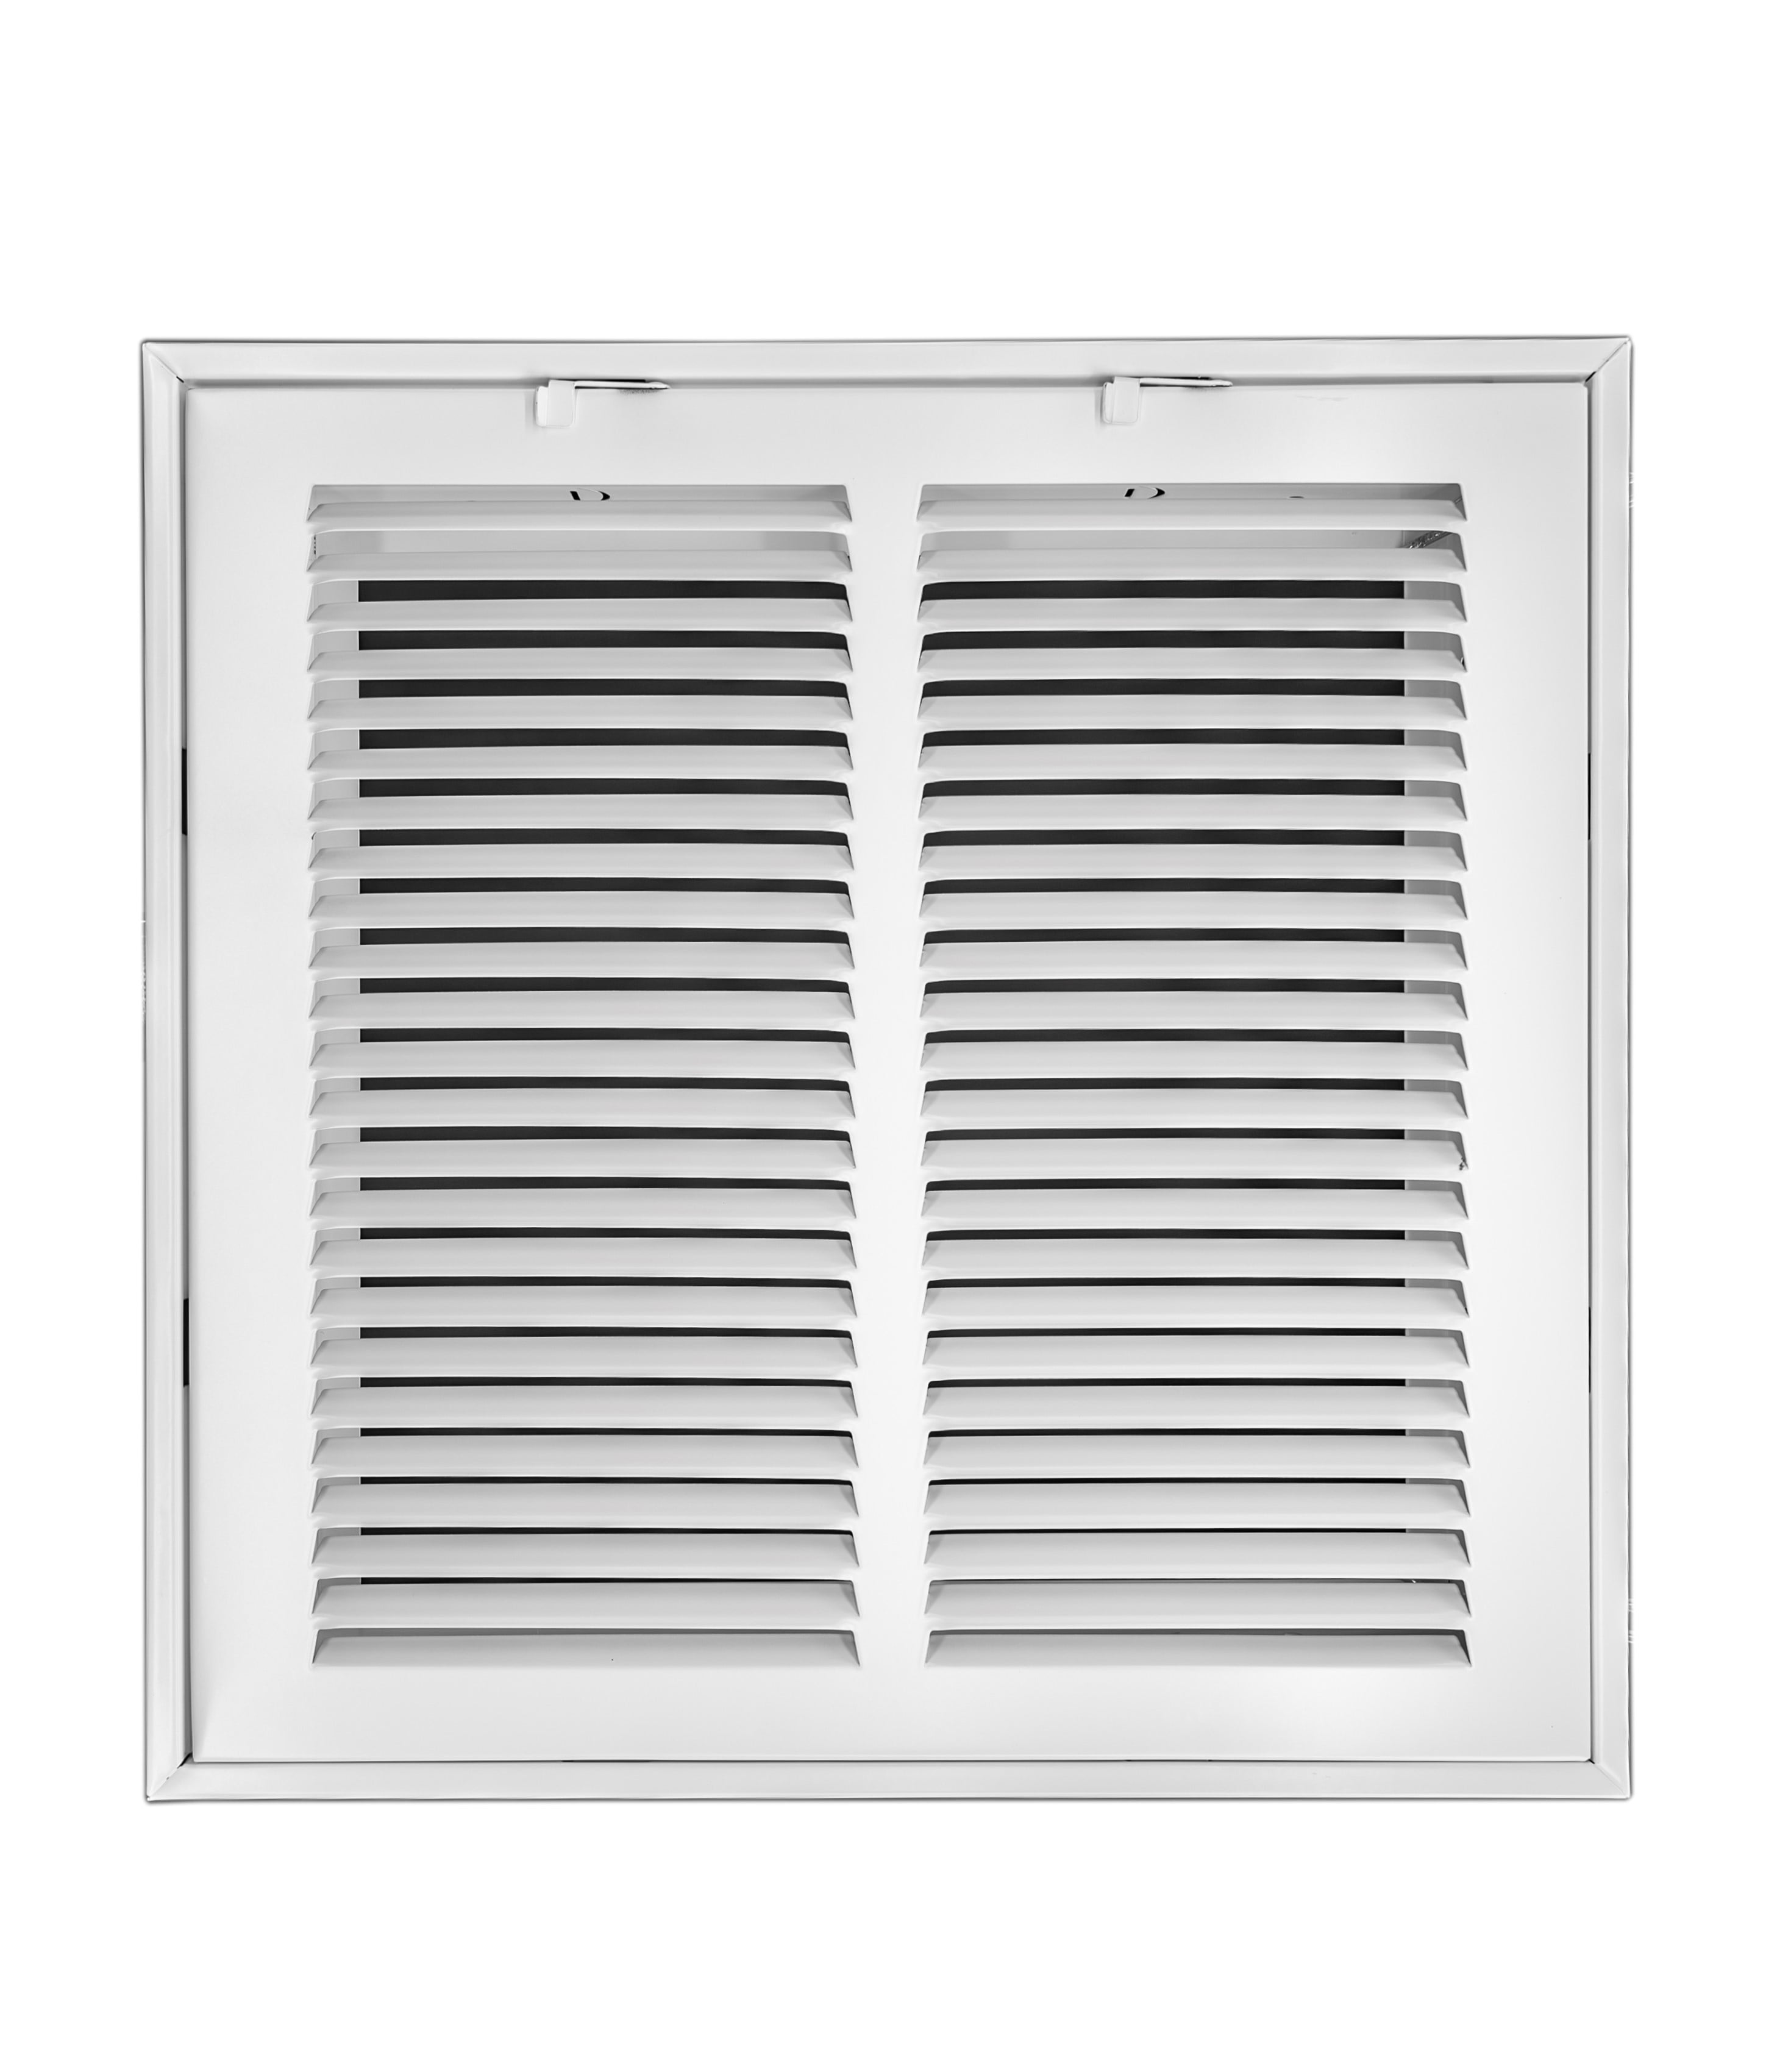 12" X 12" Return Air Filter Grille with Filter Included 